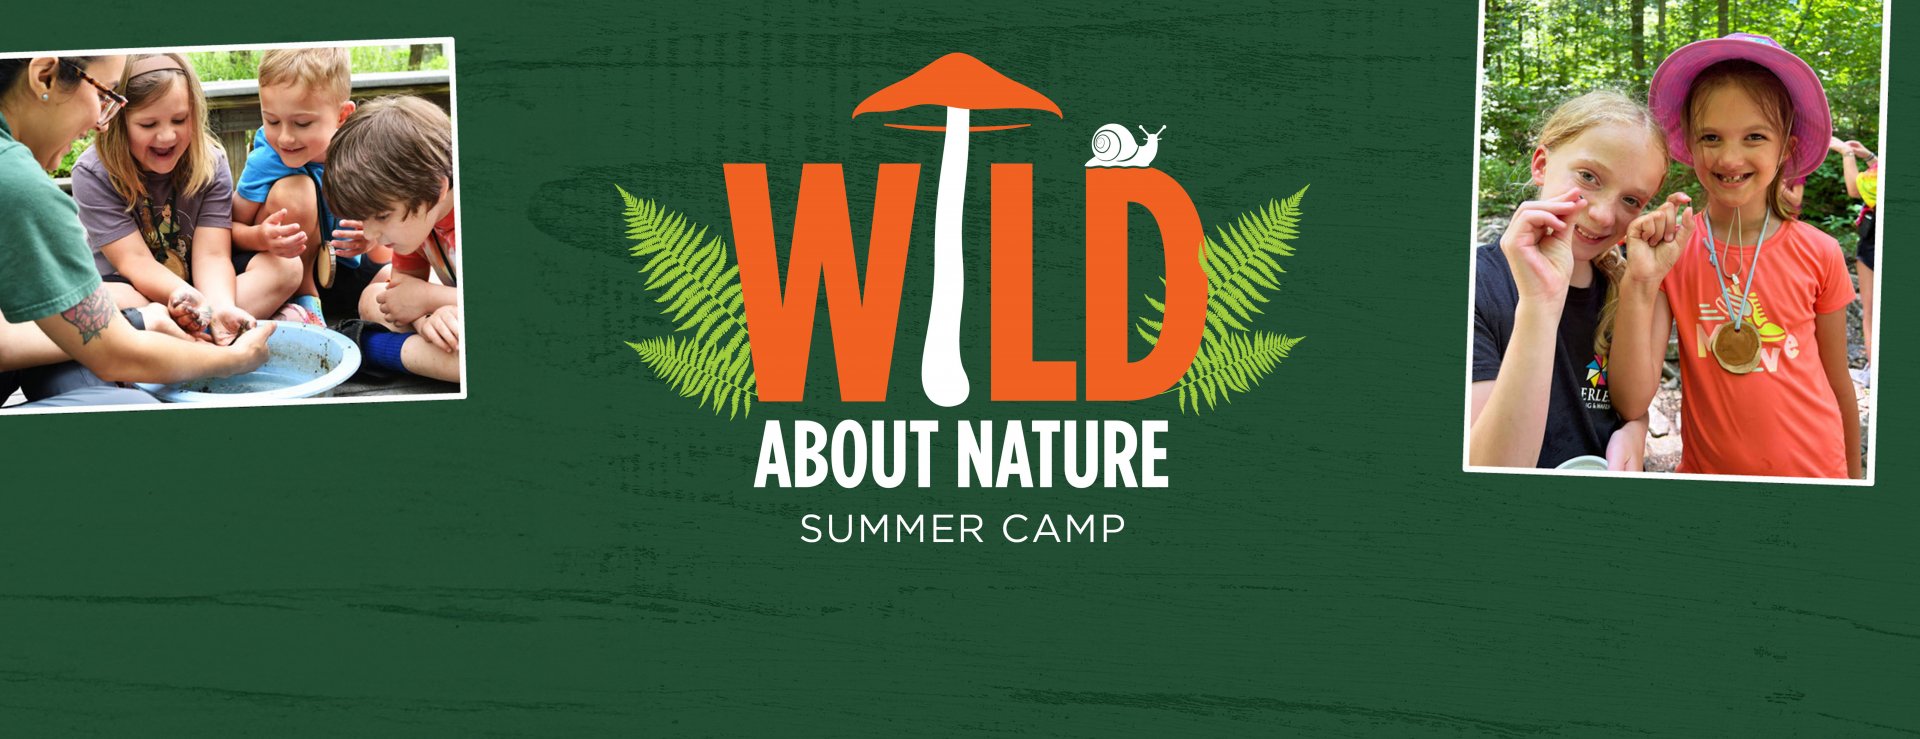 Wild About Nature Summer Camp logo